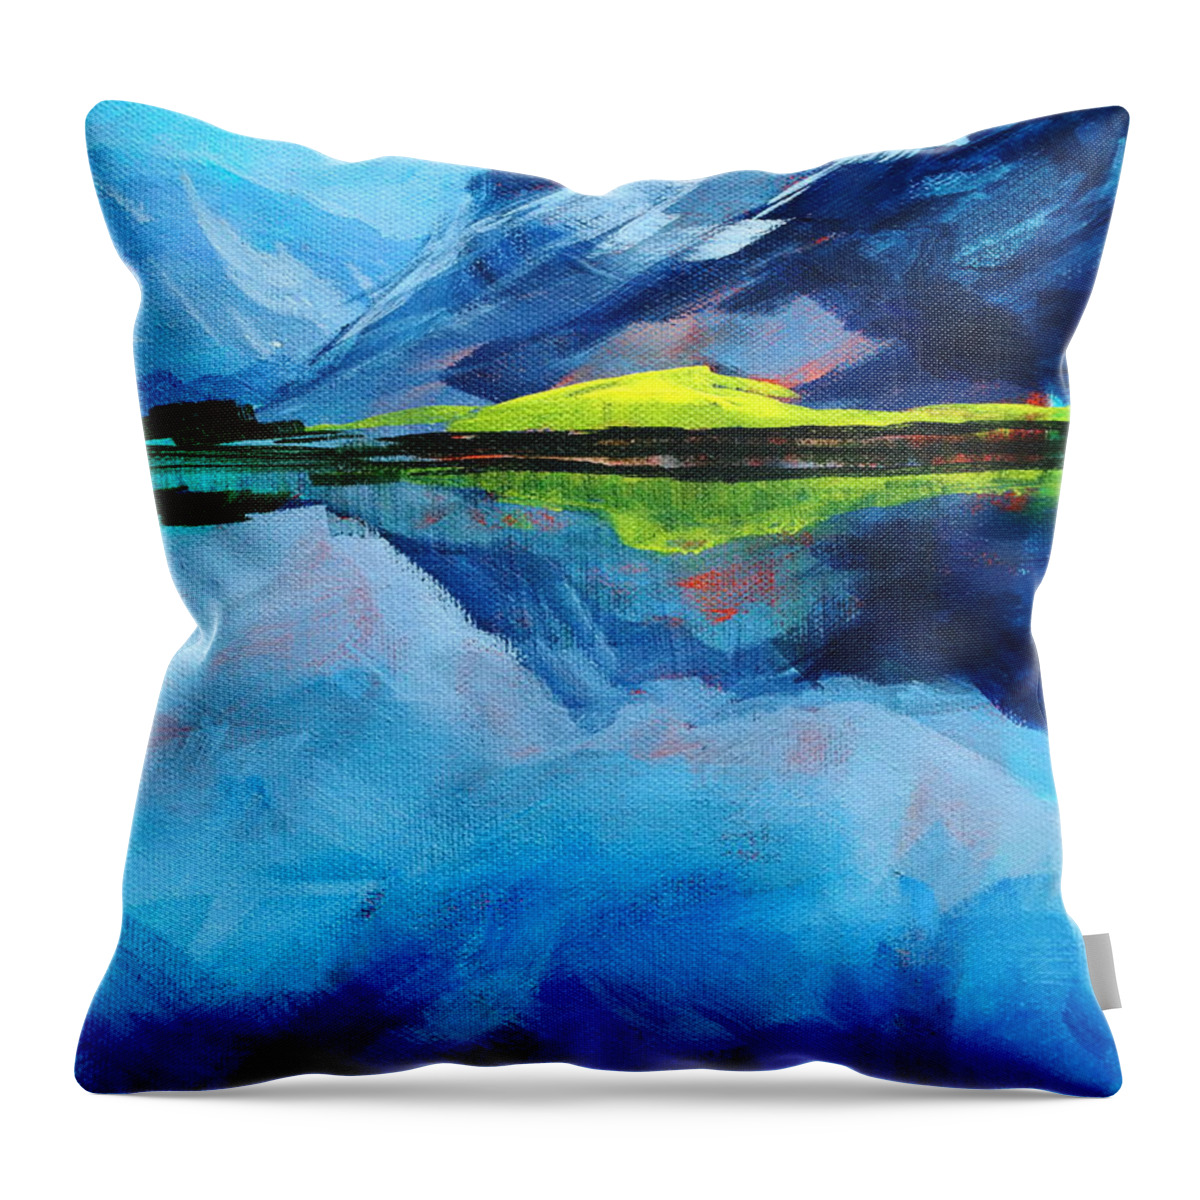 Blue Throw Pillow featuring the painting Alpine Lake Mountain Landscape Painting by Nancy Merkle